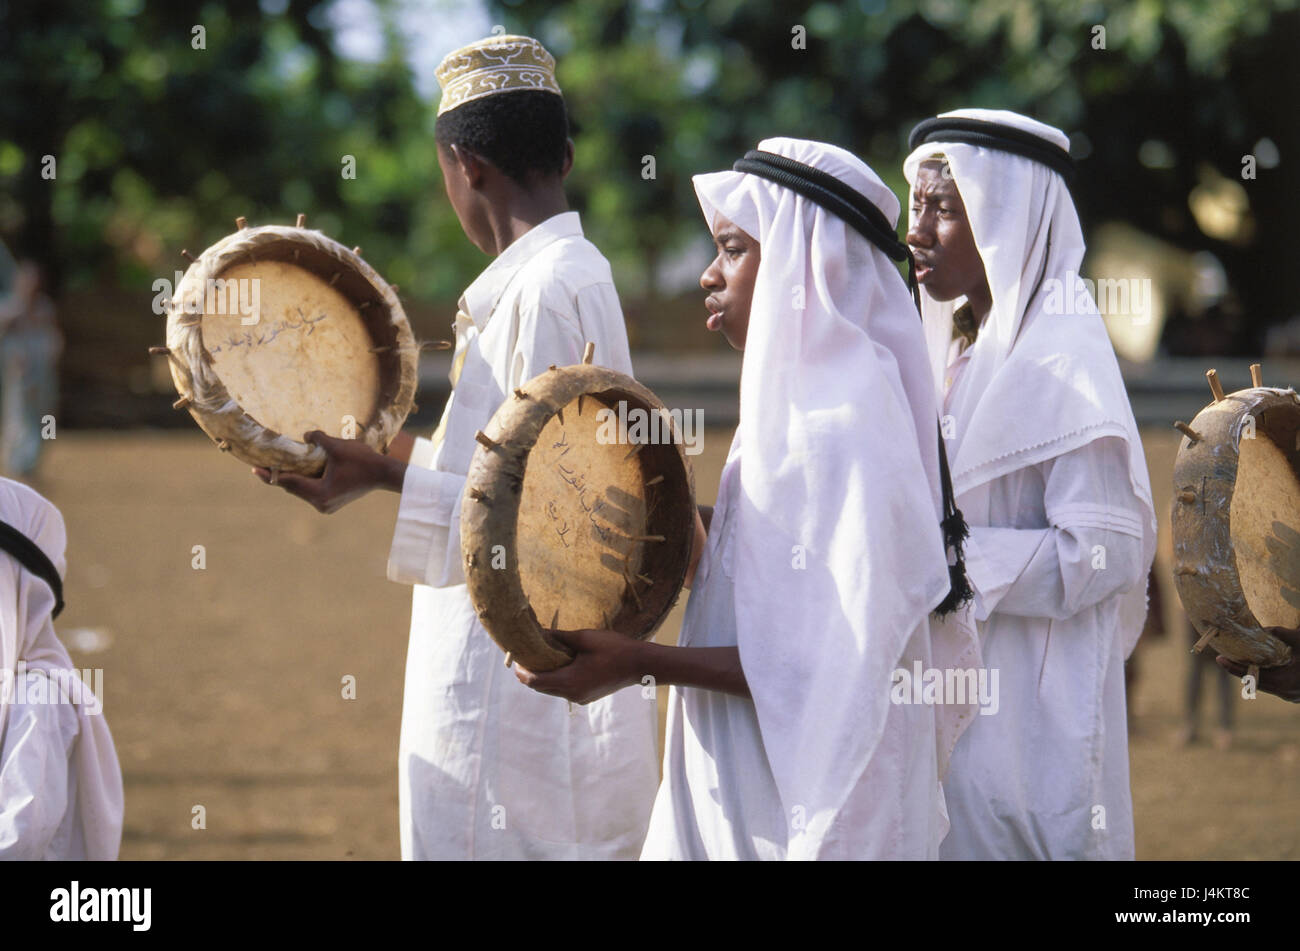 The Comoro Archipelago, island Anjouan, Mutsamudu, wedding ceremony, men, drums, at the side, no model release! Africa, Indian ocean, island state, Nzwani, wedding, marriage, ceremony, tradition, non-whites, swarthy, musicians, clothes, headscarfs, headgear, traditionally, outside Stock Photo